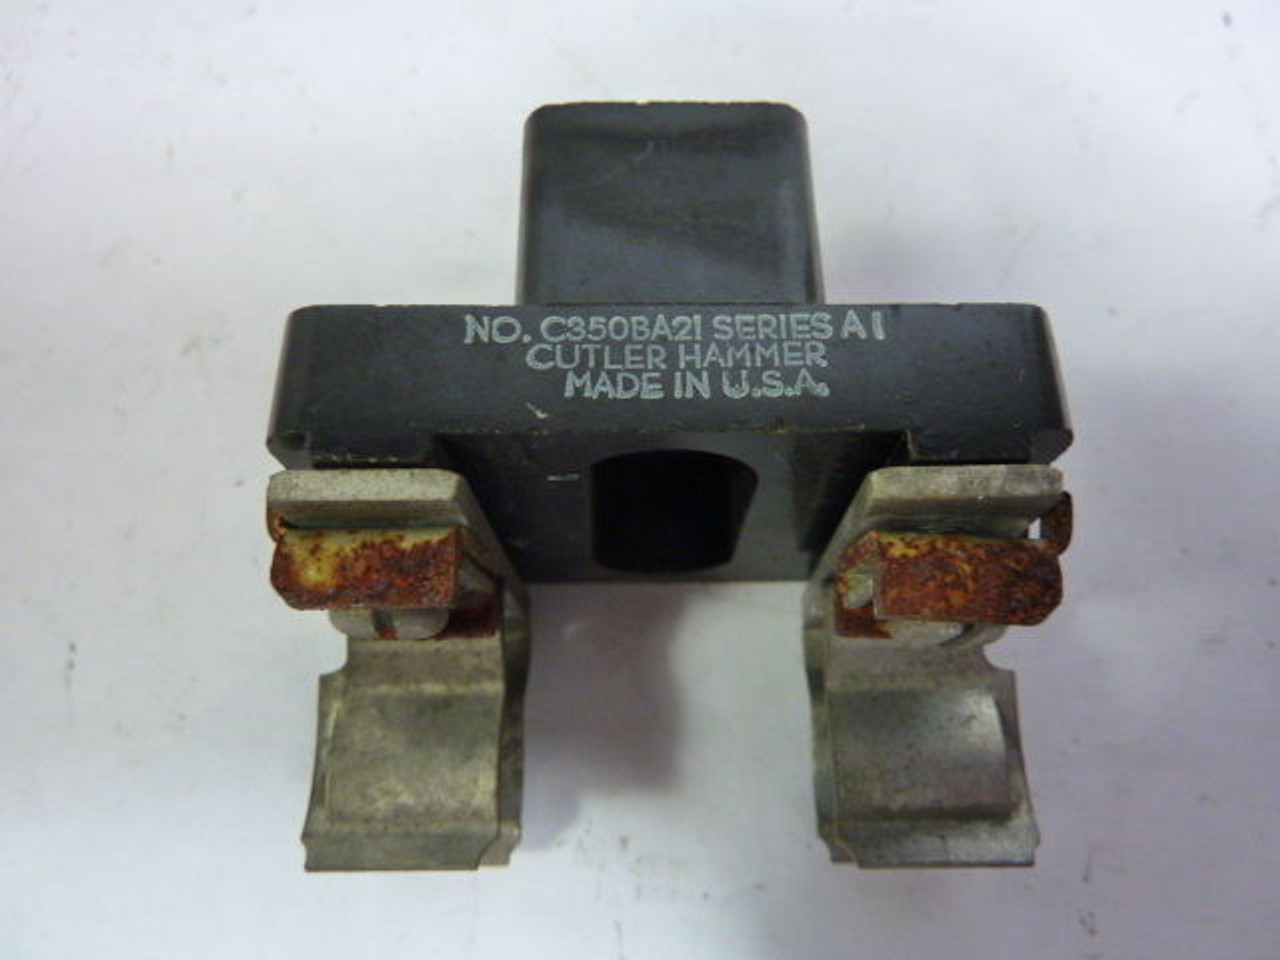 Cutler Hammer C350BA21 Ser A1 Fuse Holder Block 30A 1P 250V *Rust Contacts* USED